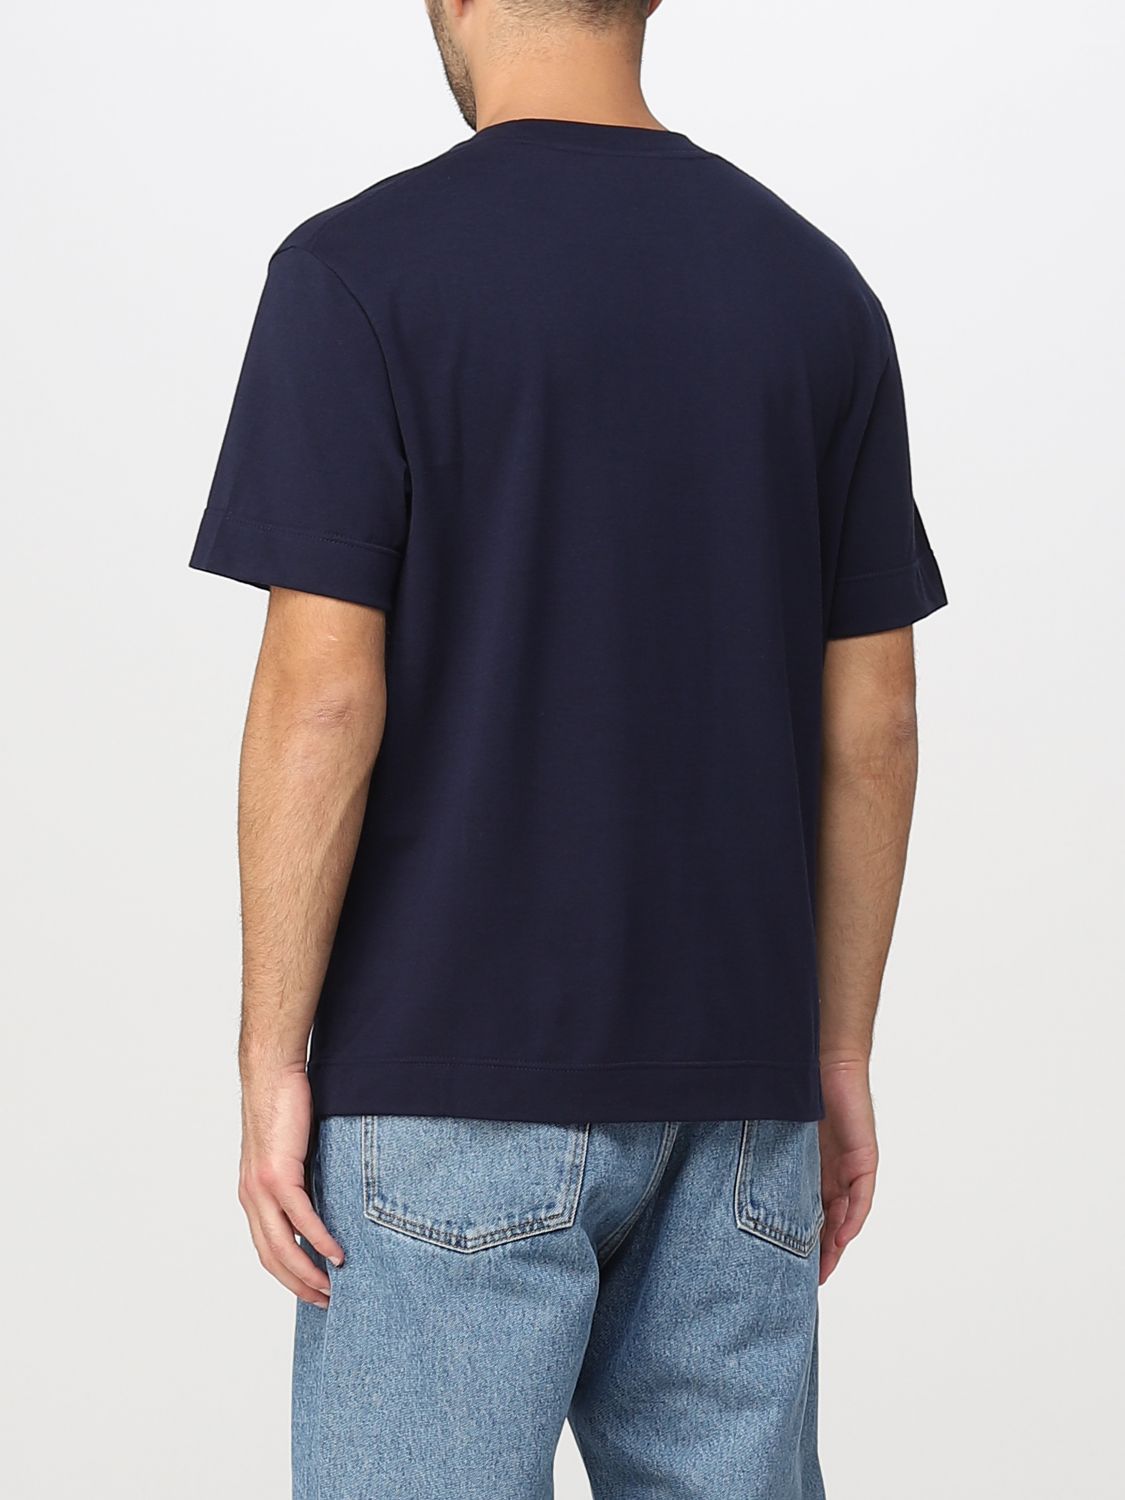 T-shirt Lacoste: Lacoste t-shirt for man navy 2